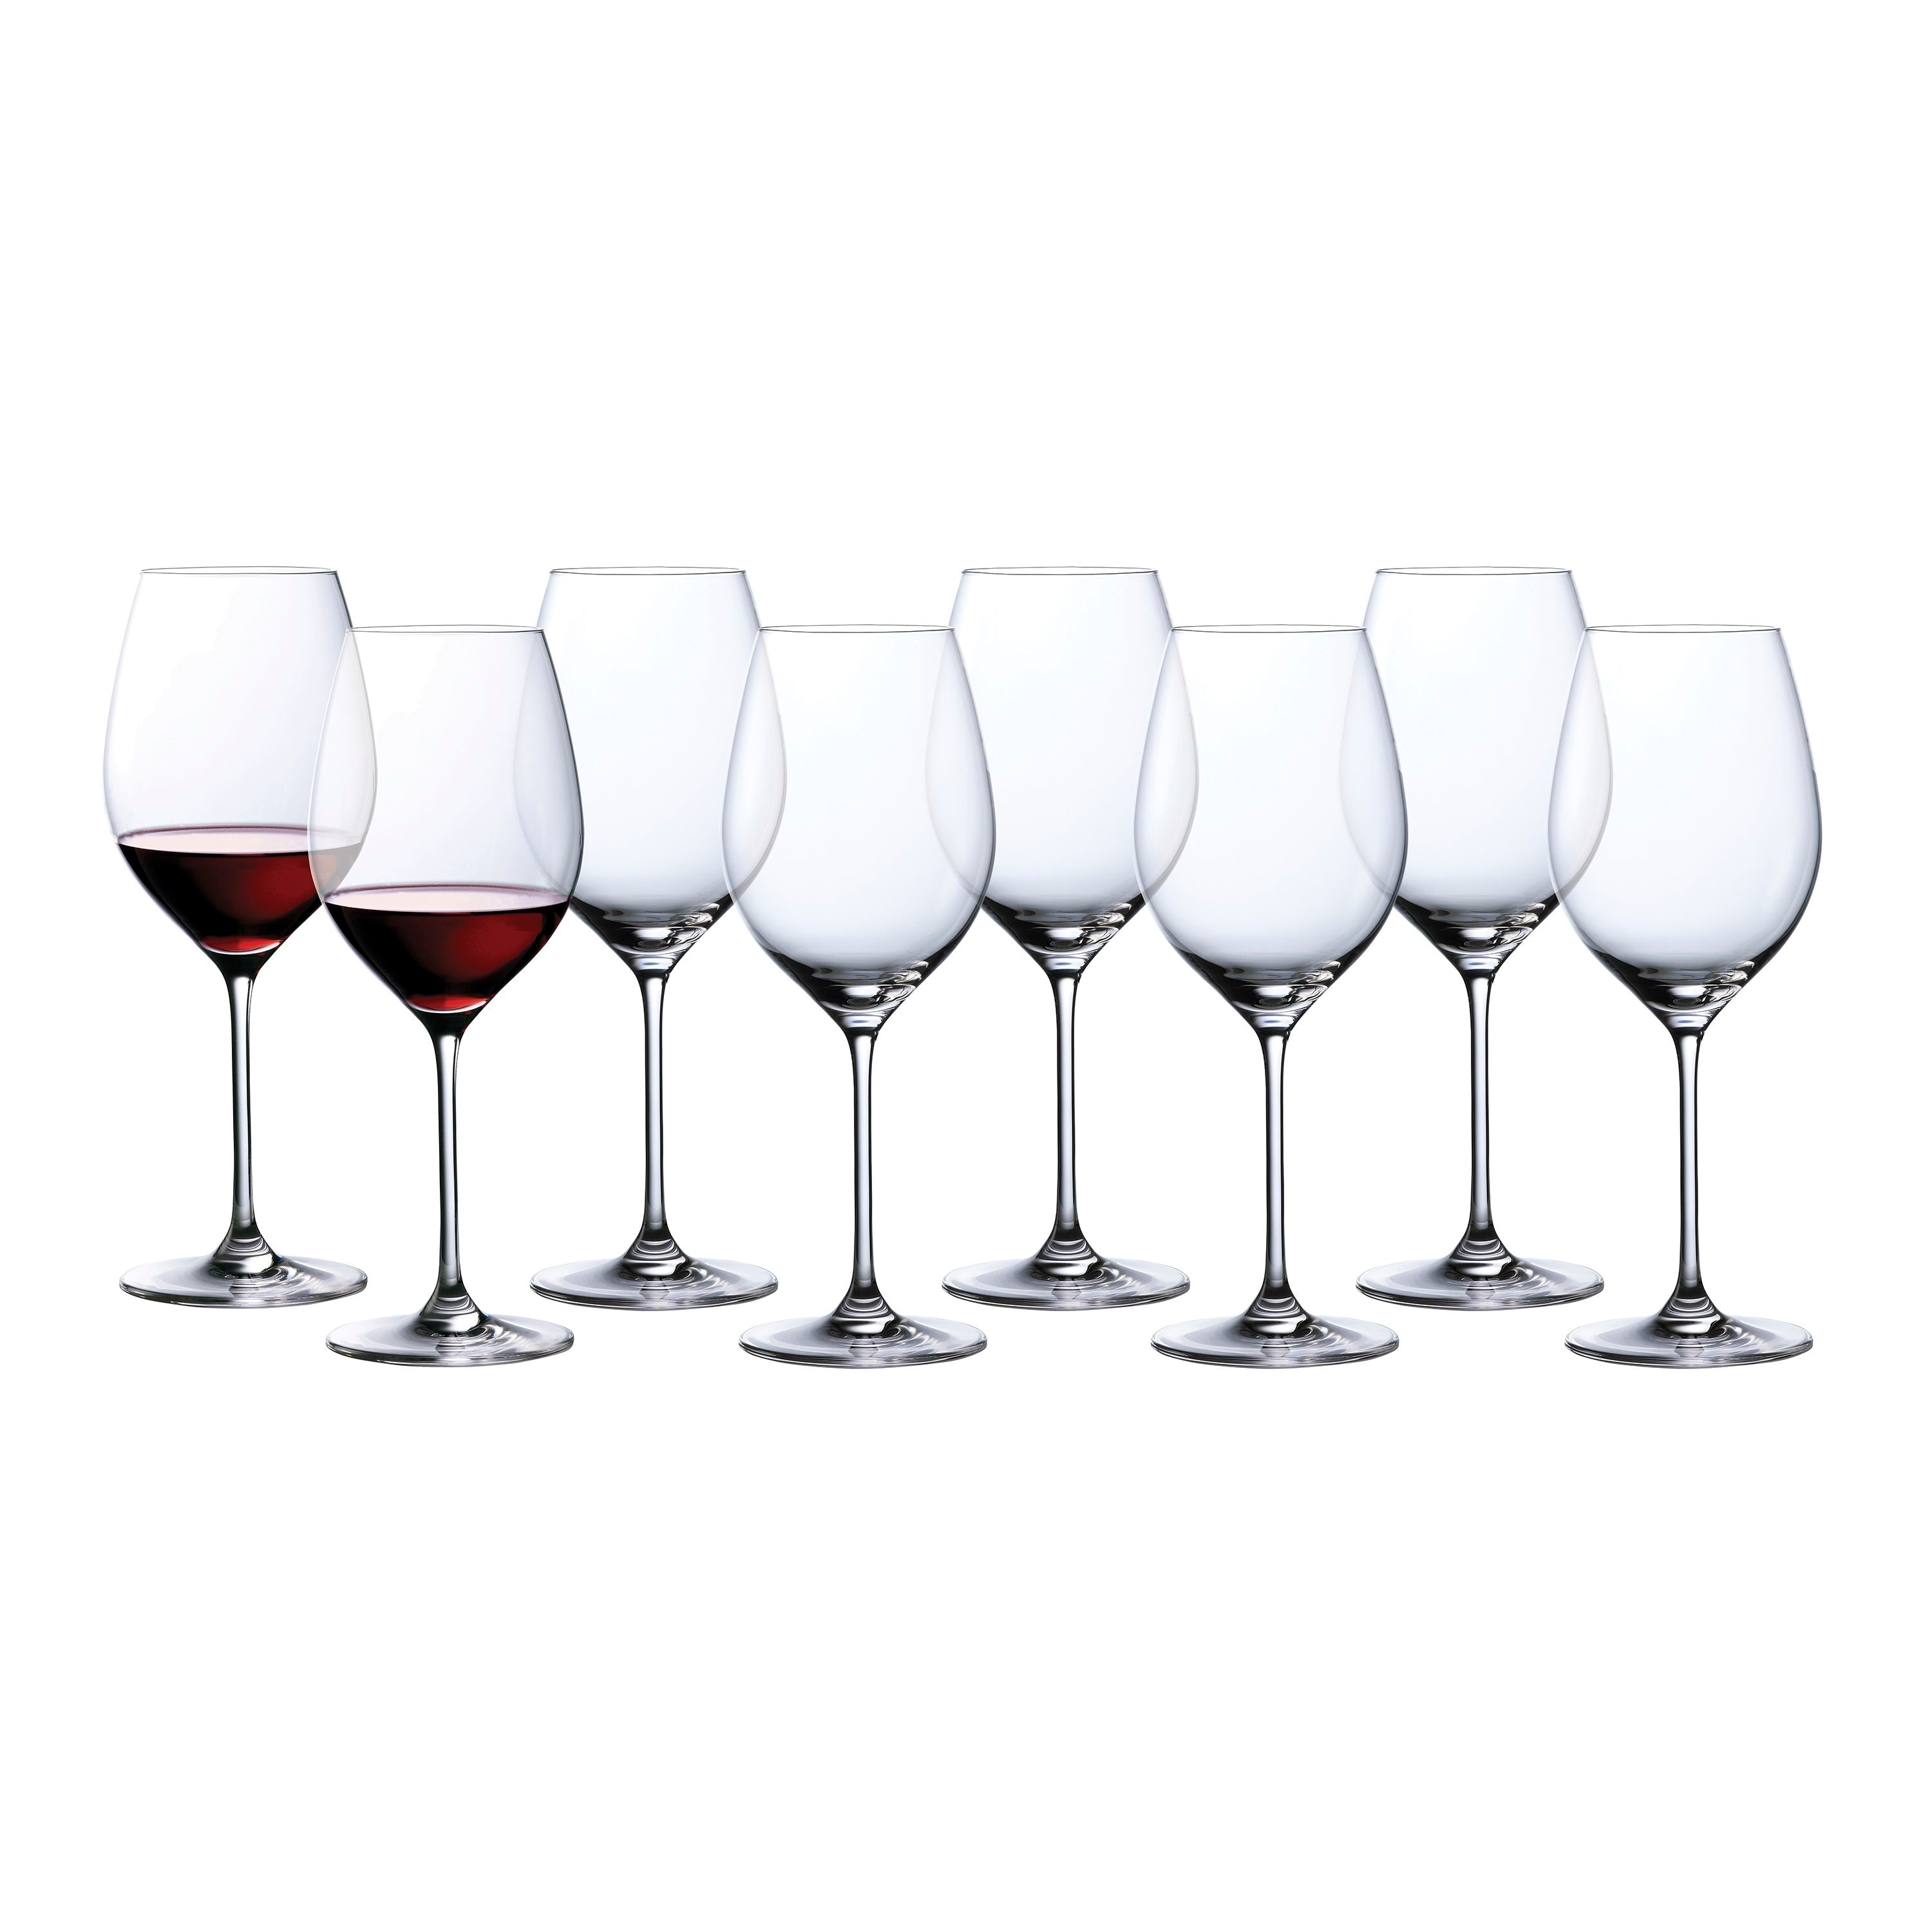 https://ak1.ostkcdn.com/images/products/is/images/direct/6f0bd5edafc84233edcac85bc8d69e08934aa748/Moments-Red-Wine-19.6-Oz-Set-8.jpg